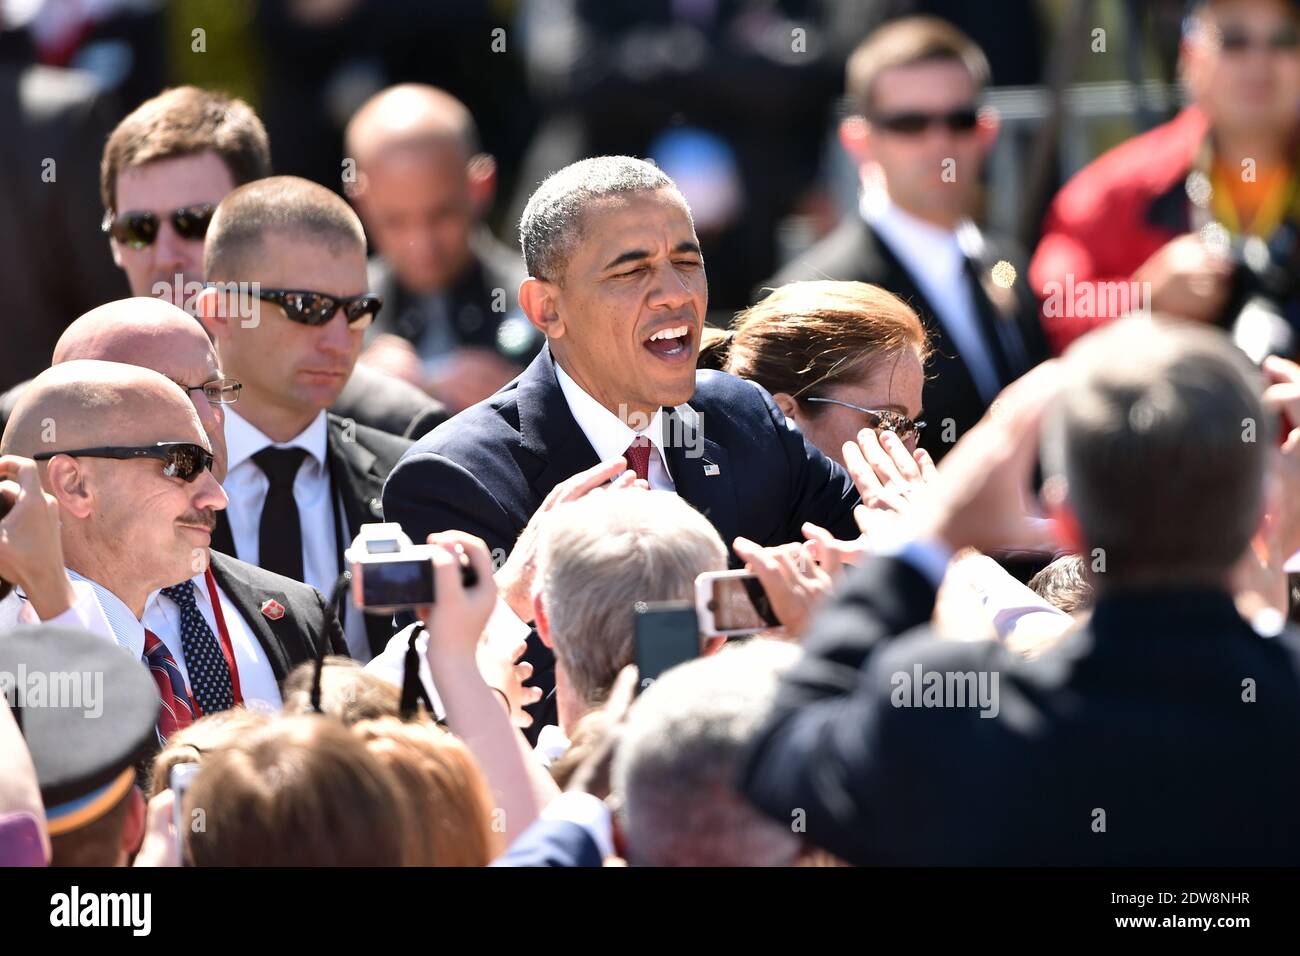 US President Barack Obama attends the bi-national France-USA ceremony at the American cemetery in Colleville, as part of the official ceremonies on the occasion of the D-Day 70th Anniversary, on June 6, 2014 in Normandy, France. Photo by Abd Rabbo-Bernard-Gouhier-Mousse/ABACAPRESS.COM Stock Photo